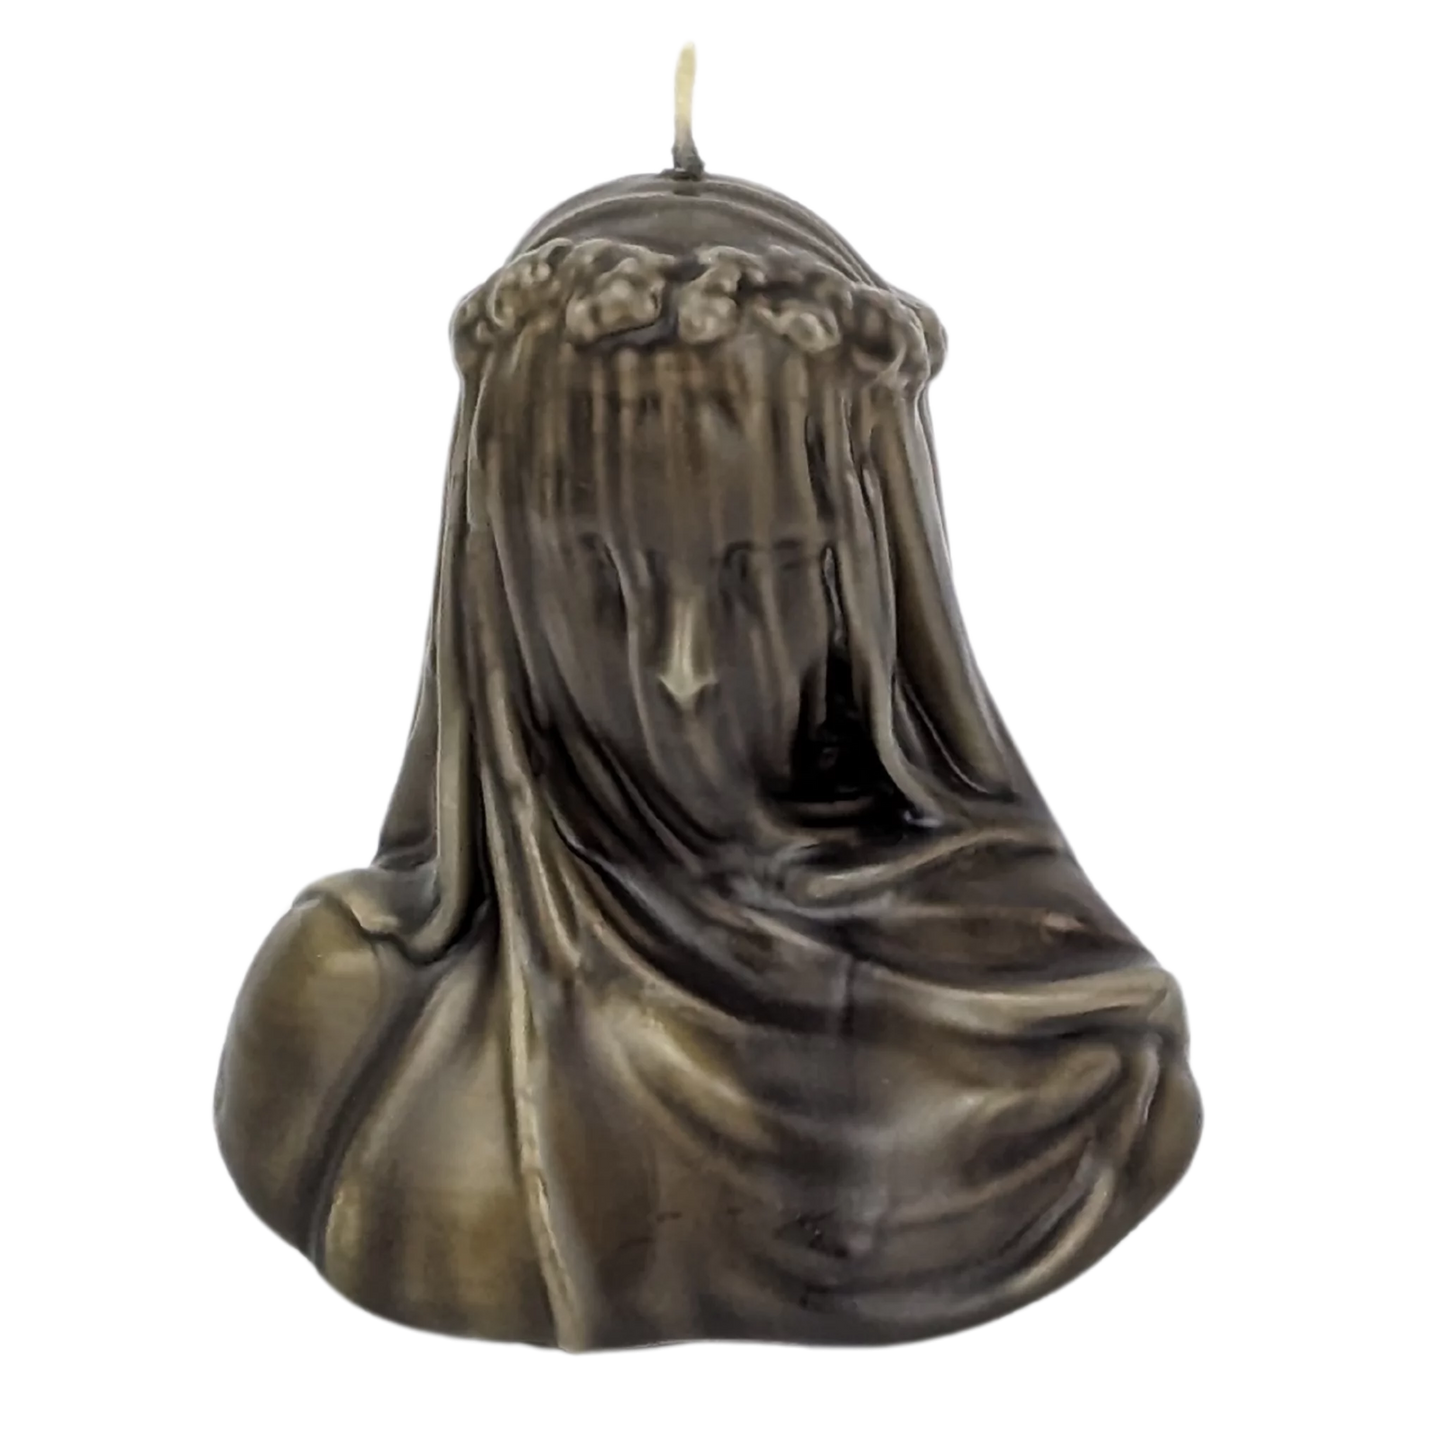 Sculptural Veiled Lady candle made from pure beeswax, a spooky yet sophisticated touch for Halloween and all-year elegance.